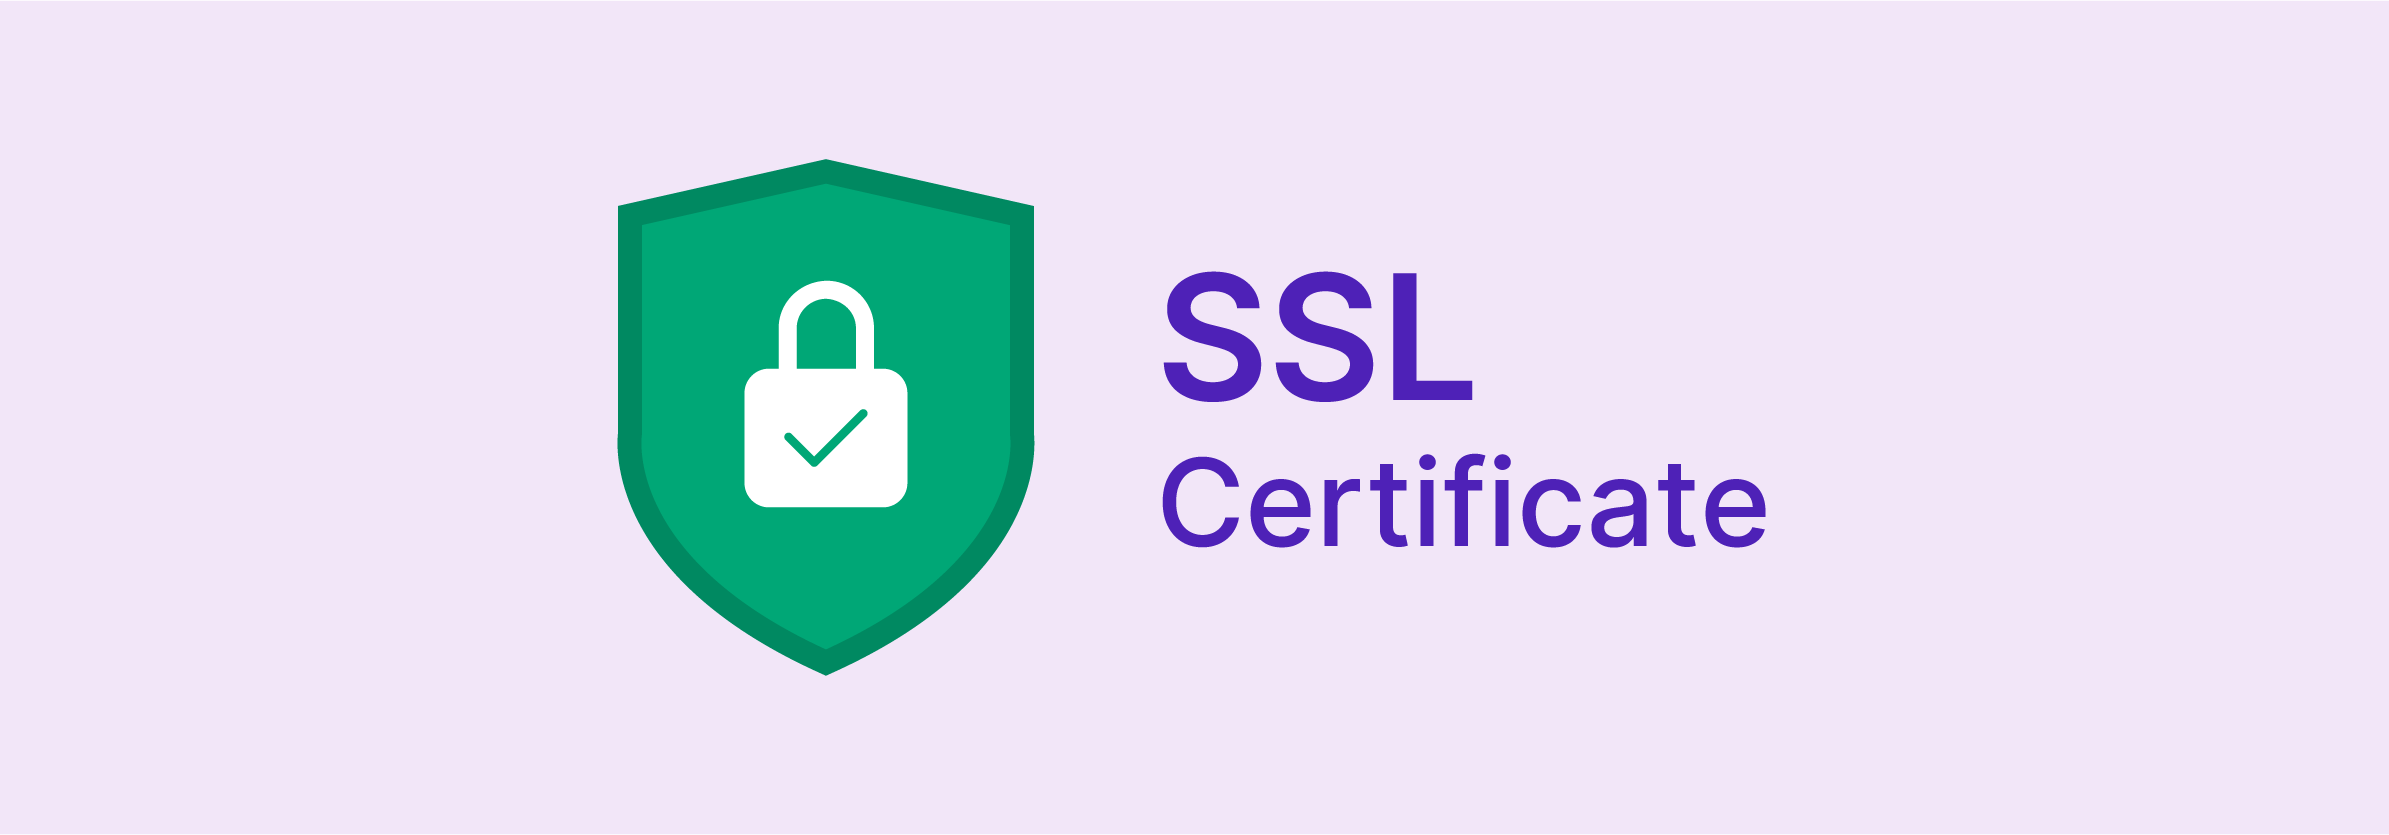 Importance of SSL certificates in Magento e-commerce security